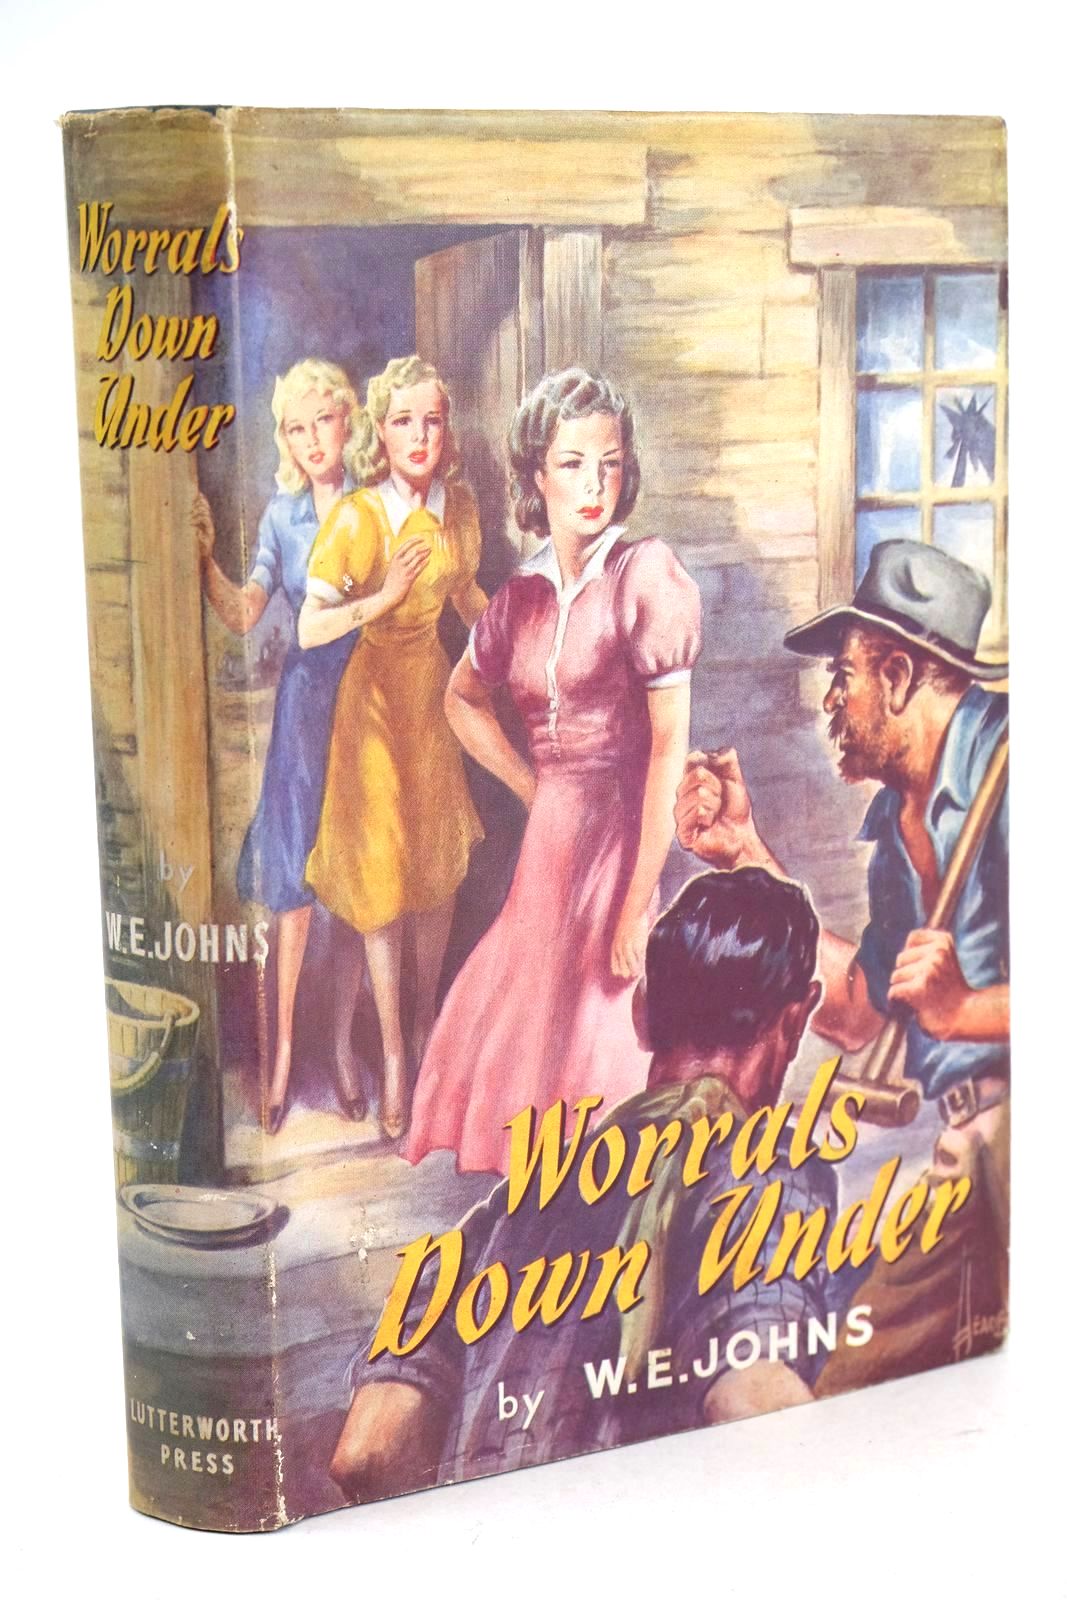 Photo of WORRALS DOWN UNDER written by Johns, W.E. published by Lutterworth Press (STOCK CODE: 1326093)  for sale by Stella & Rose's Books